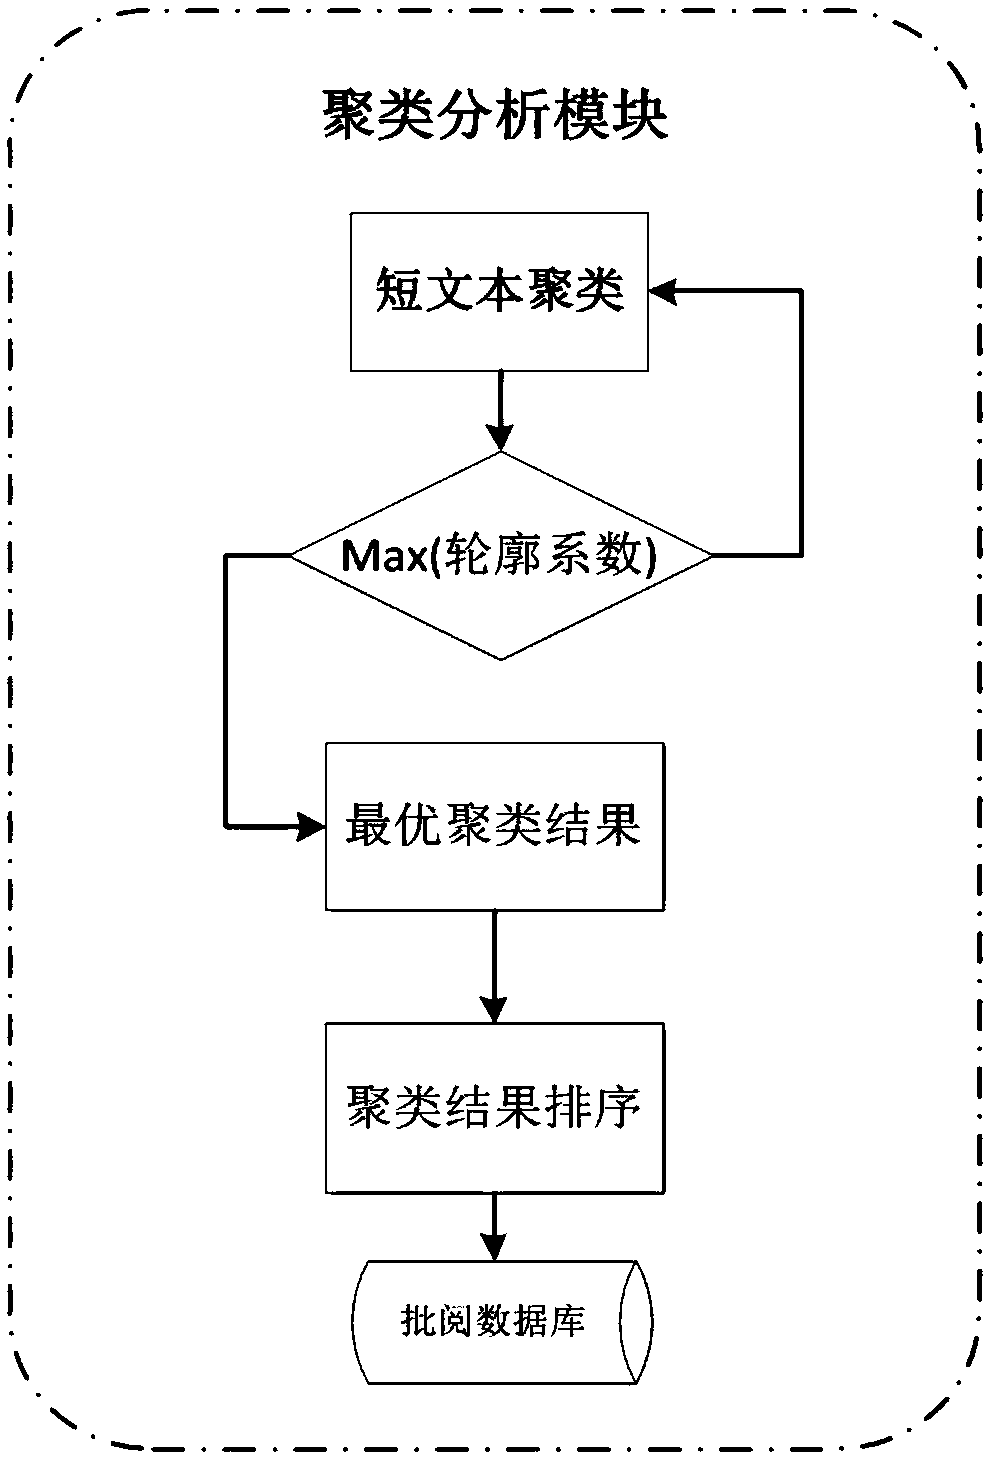 Subjective question marking system and method combining short text clustering and recommendation mechanism